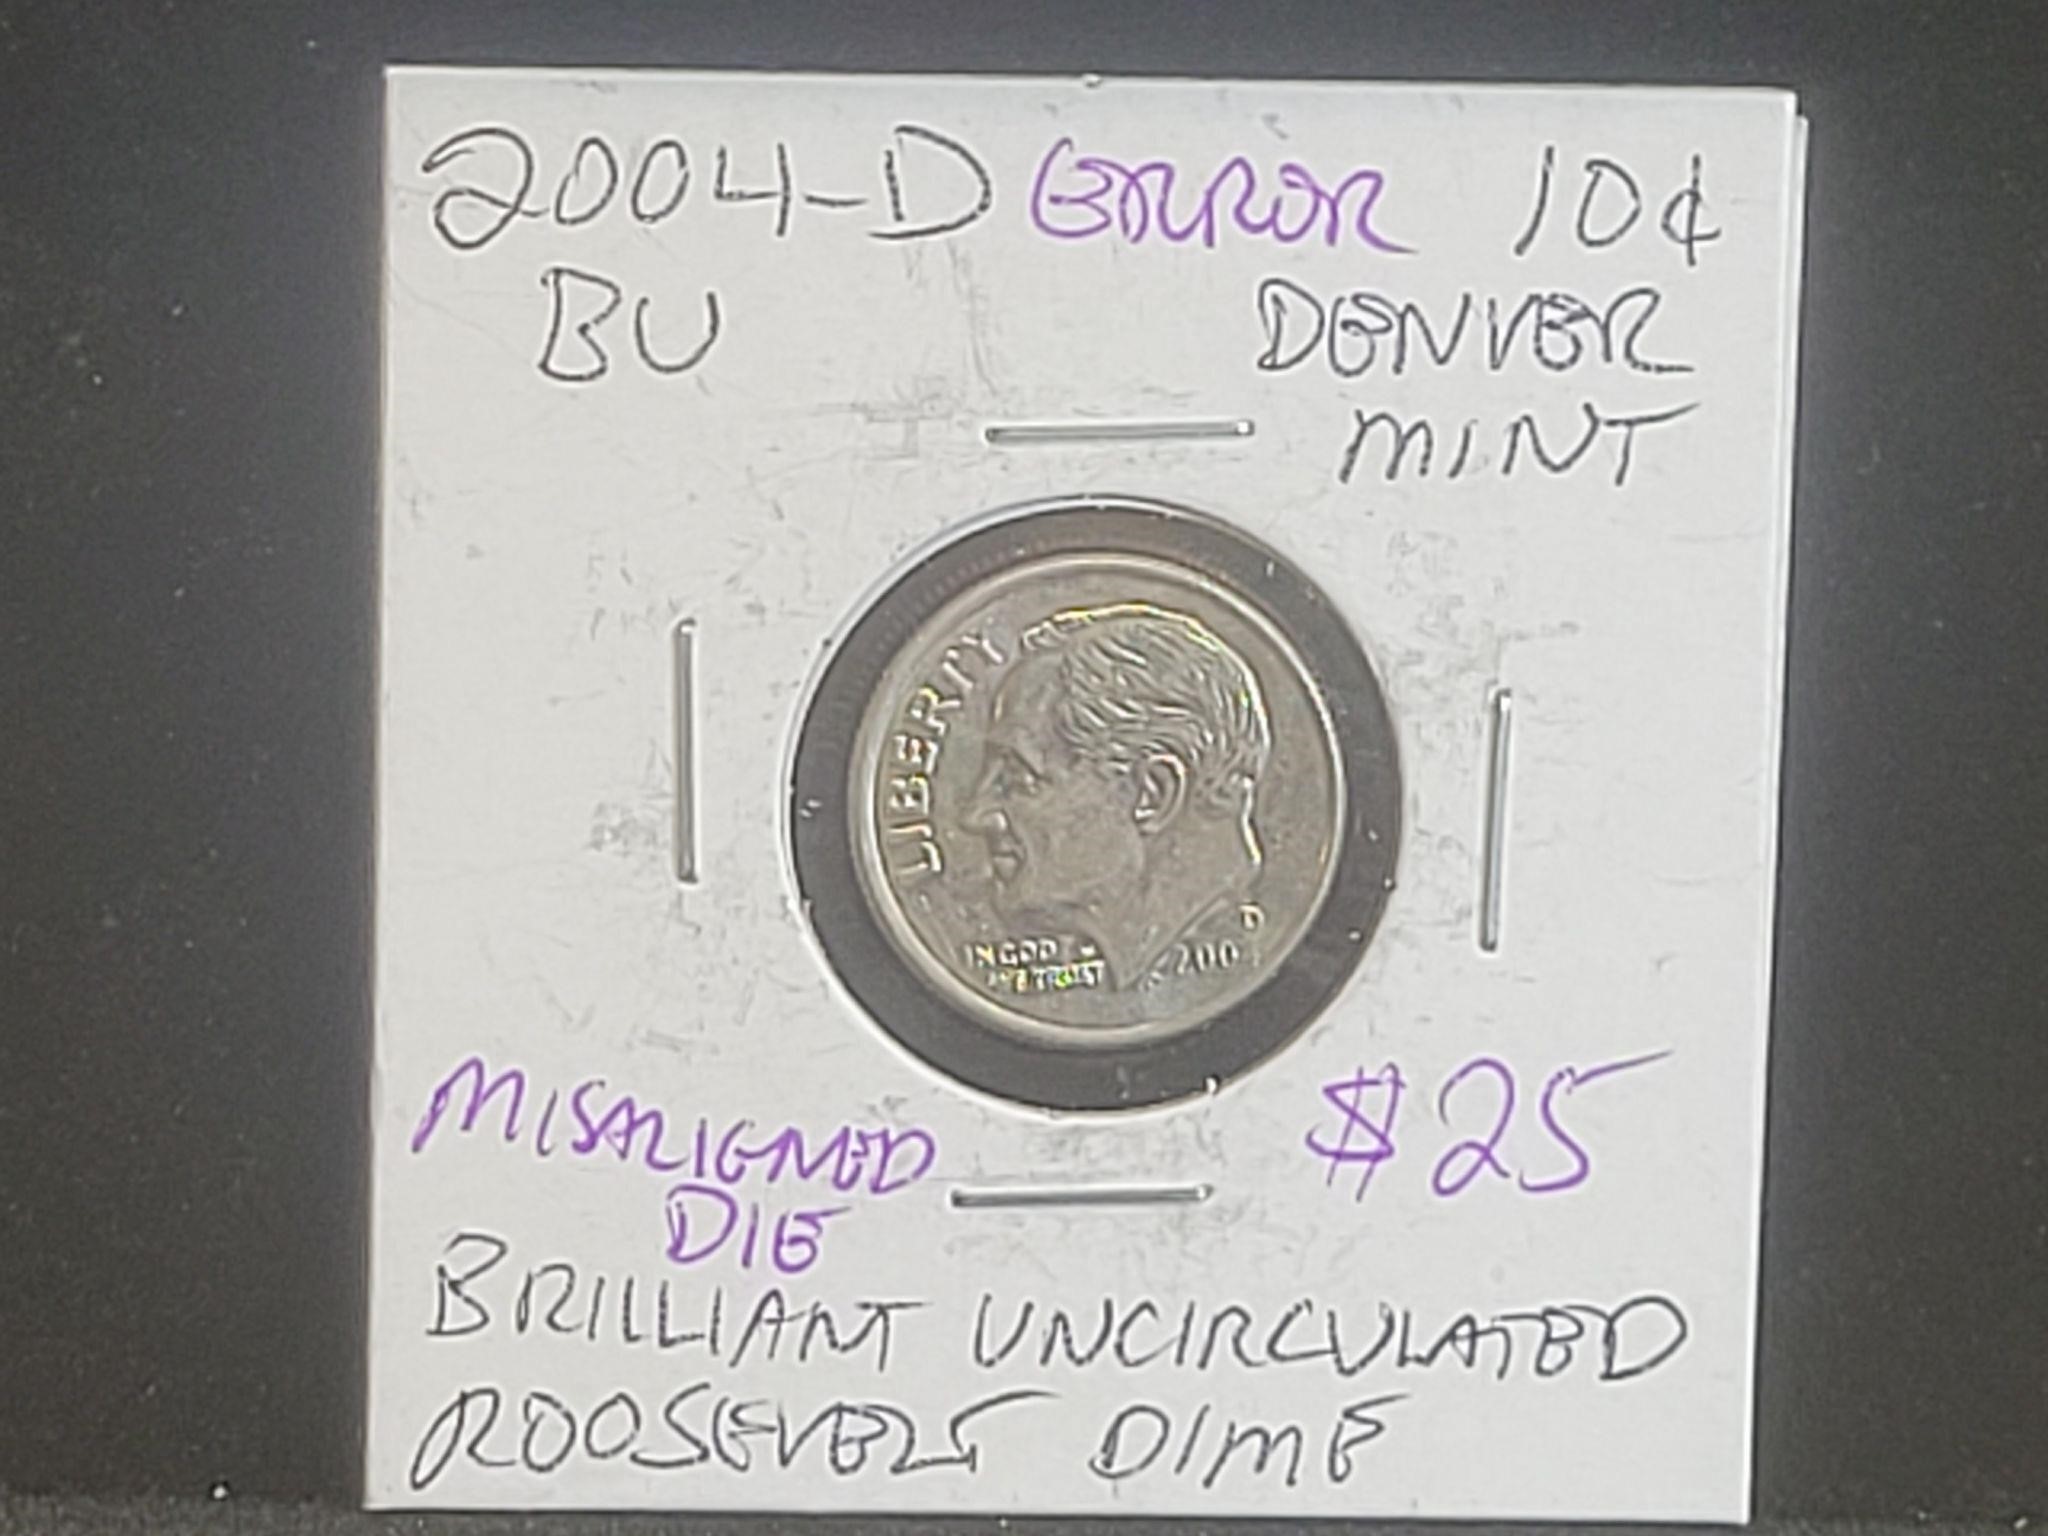 2004-D Dime w/ Minting Error's - Unauthenticated